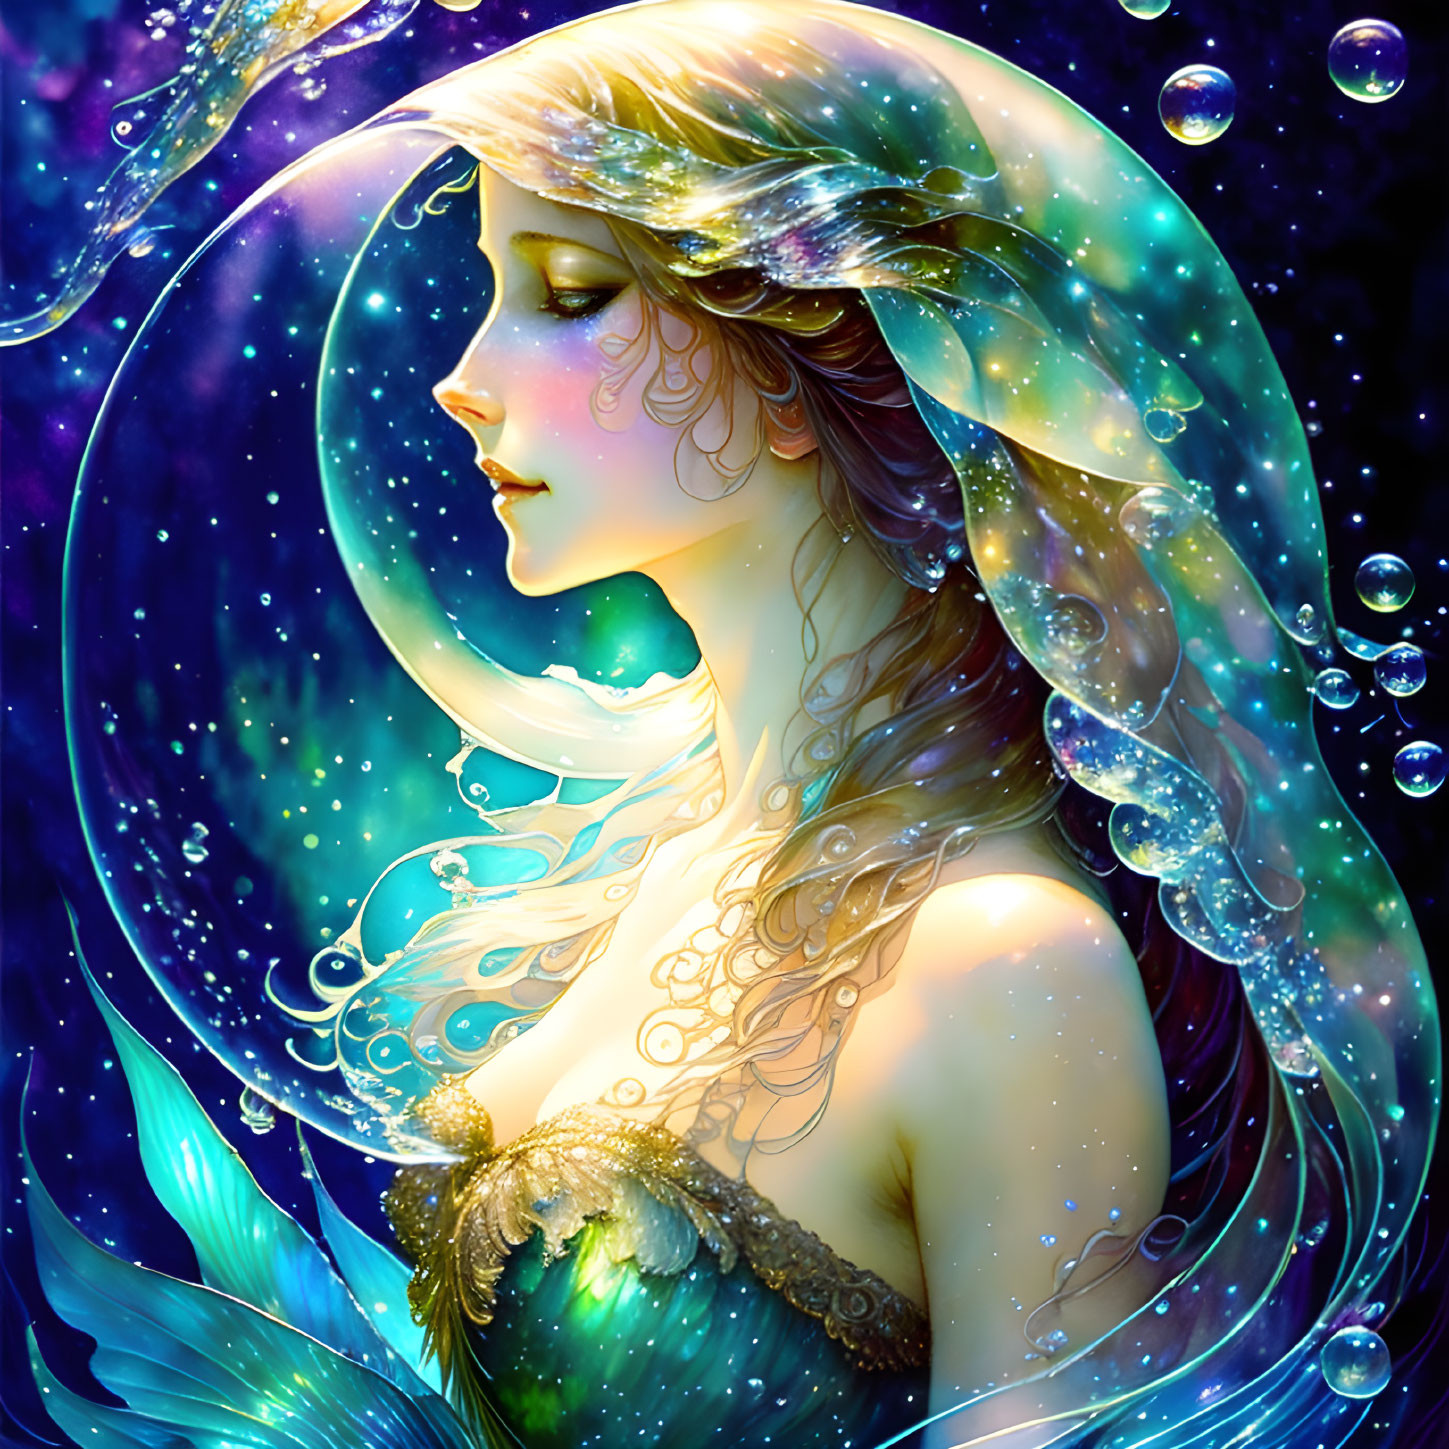 Ethereal woman in swirling water and bubbles on starry blue backdrop